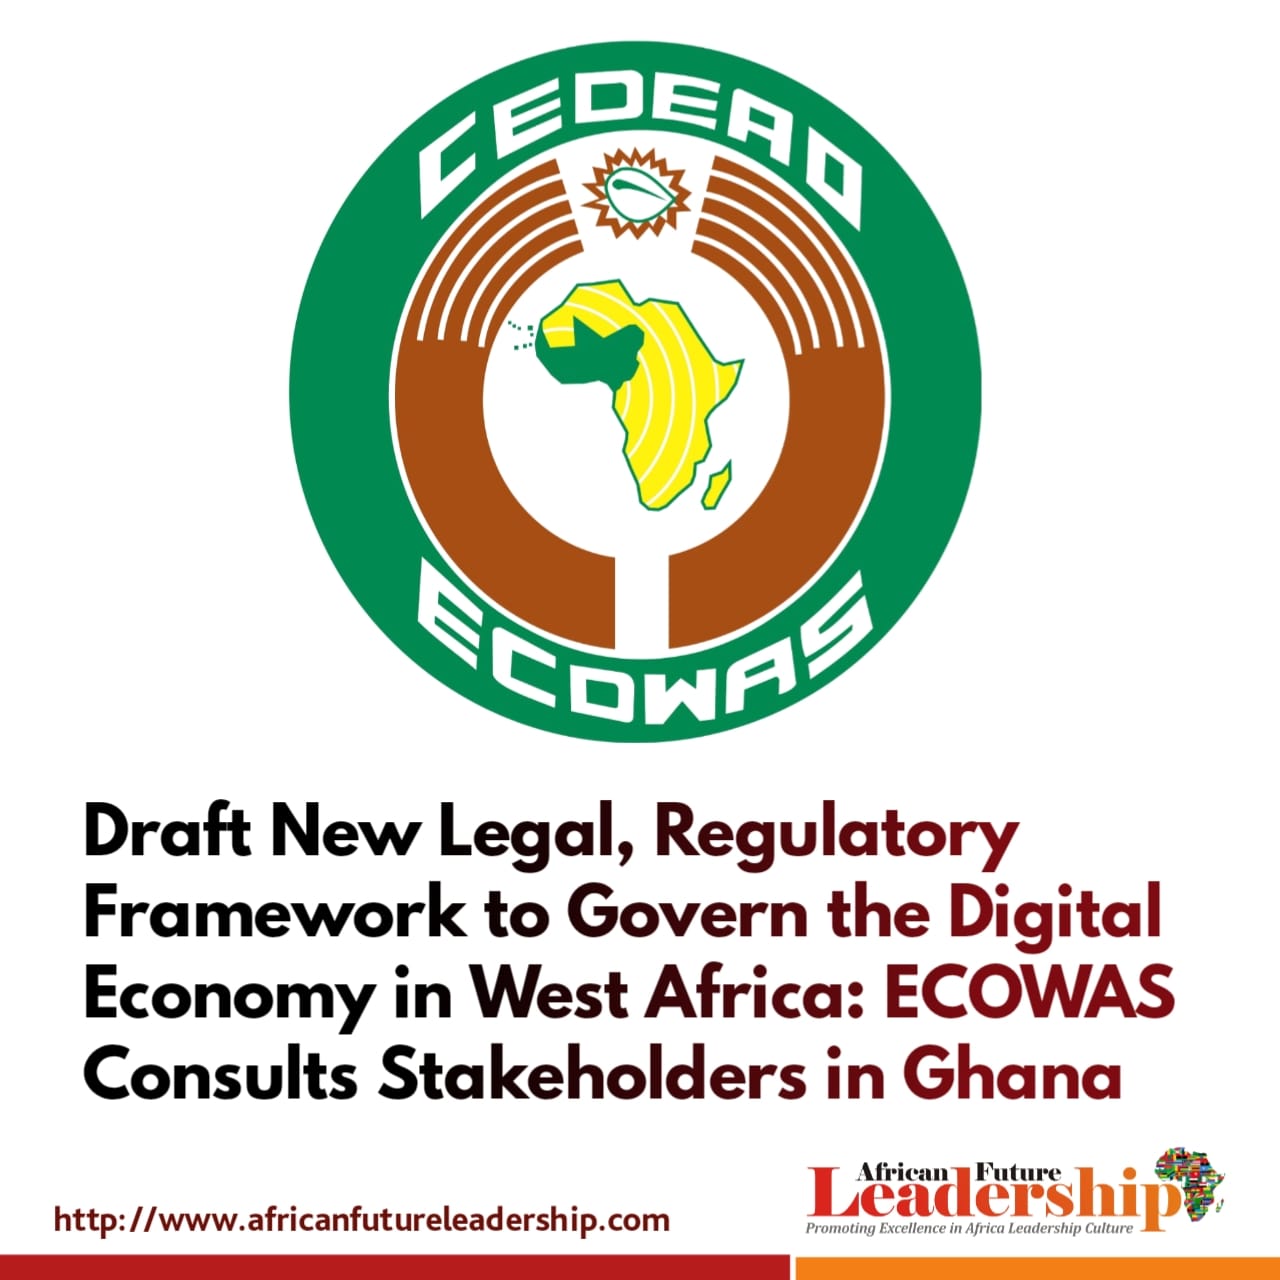 Draft New Legal, Regulatory Framework to Govern the Digital Economy in West Africa: ECOWAS Consults Stakeholders in Ghana